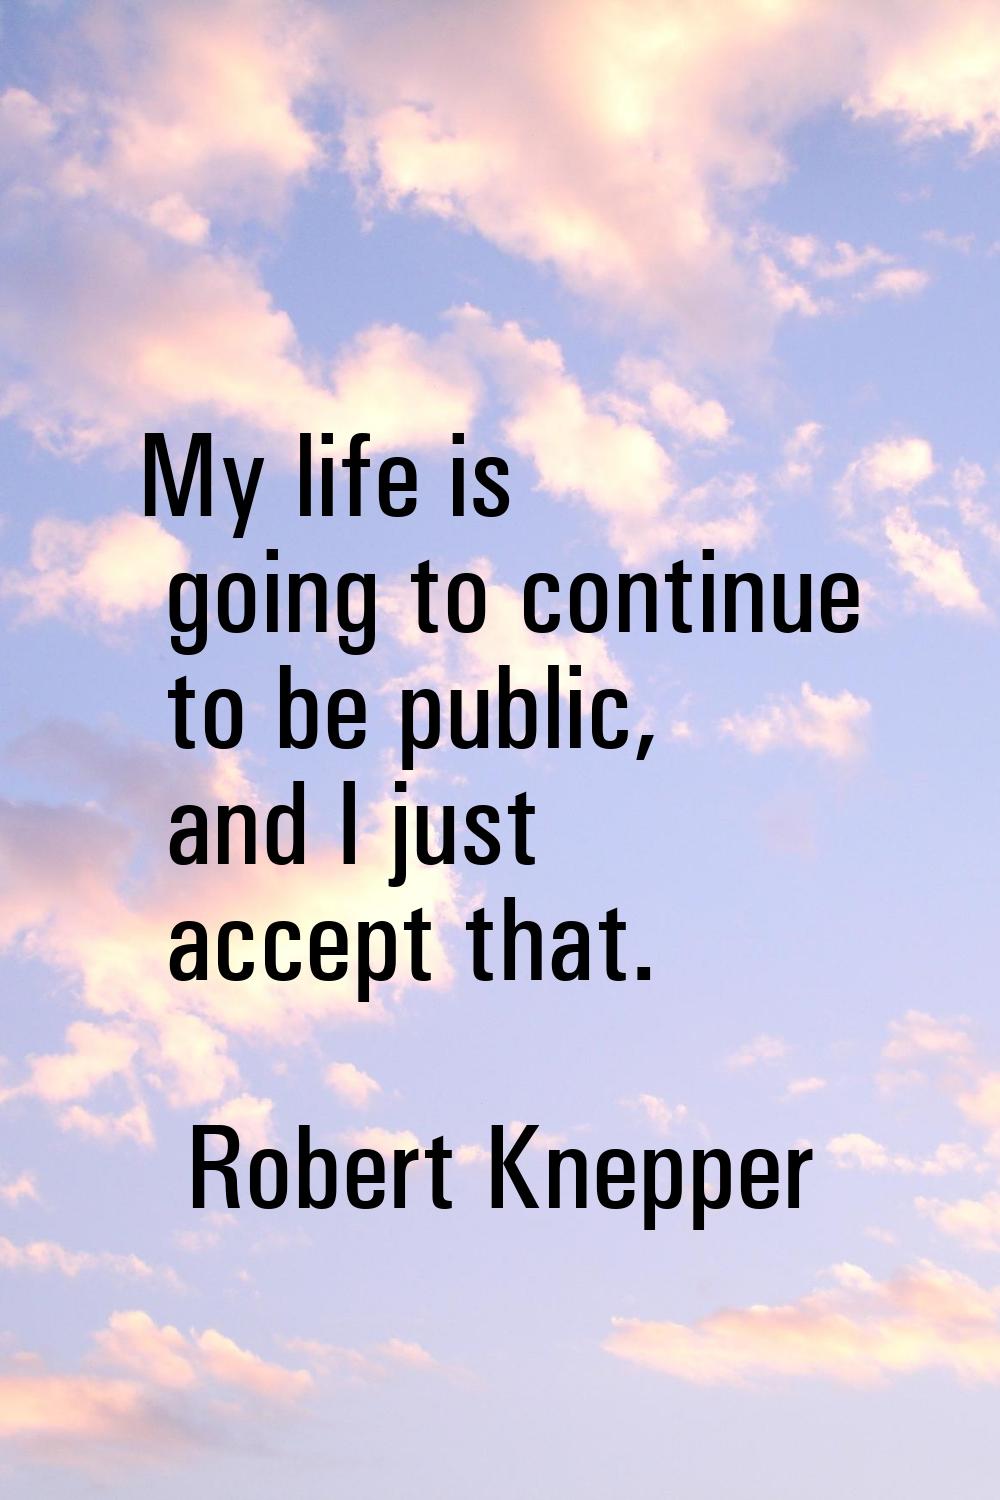 My life is going to continue to be public, and I just accept that.